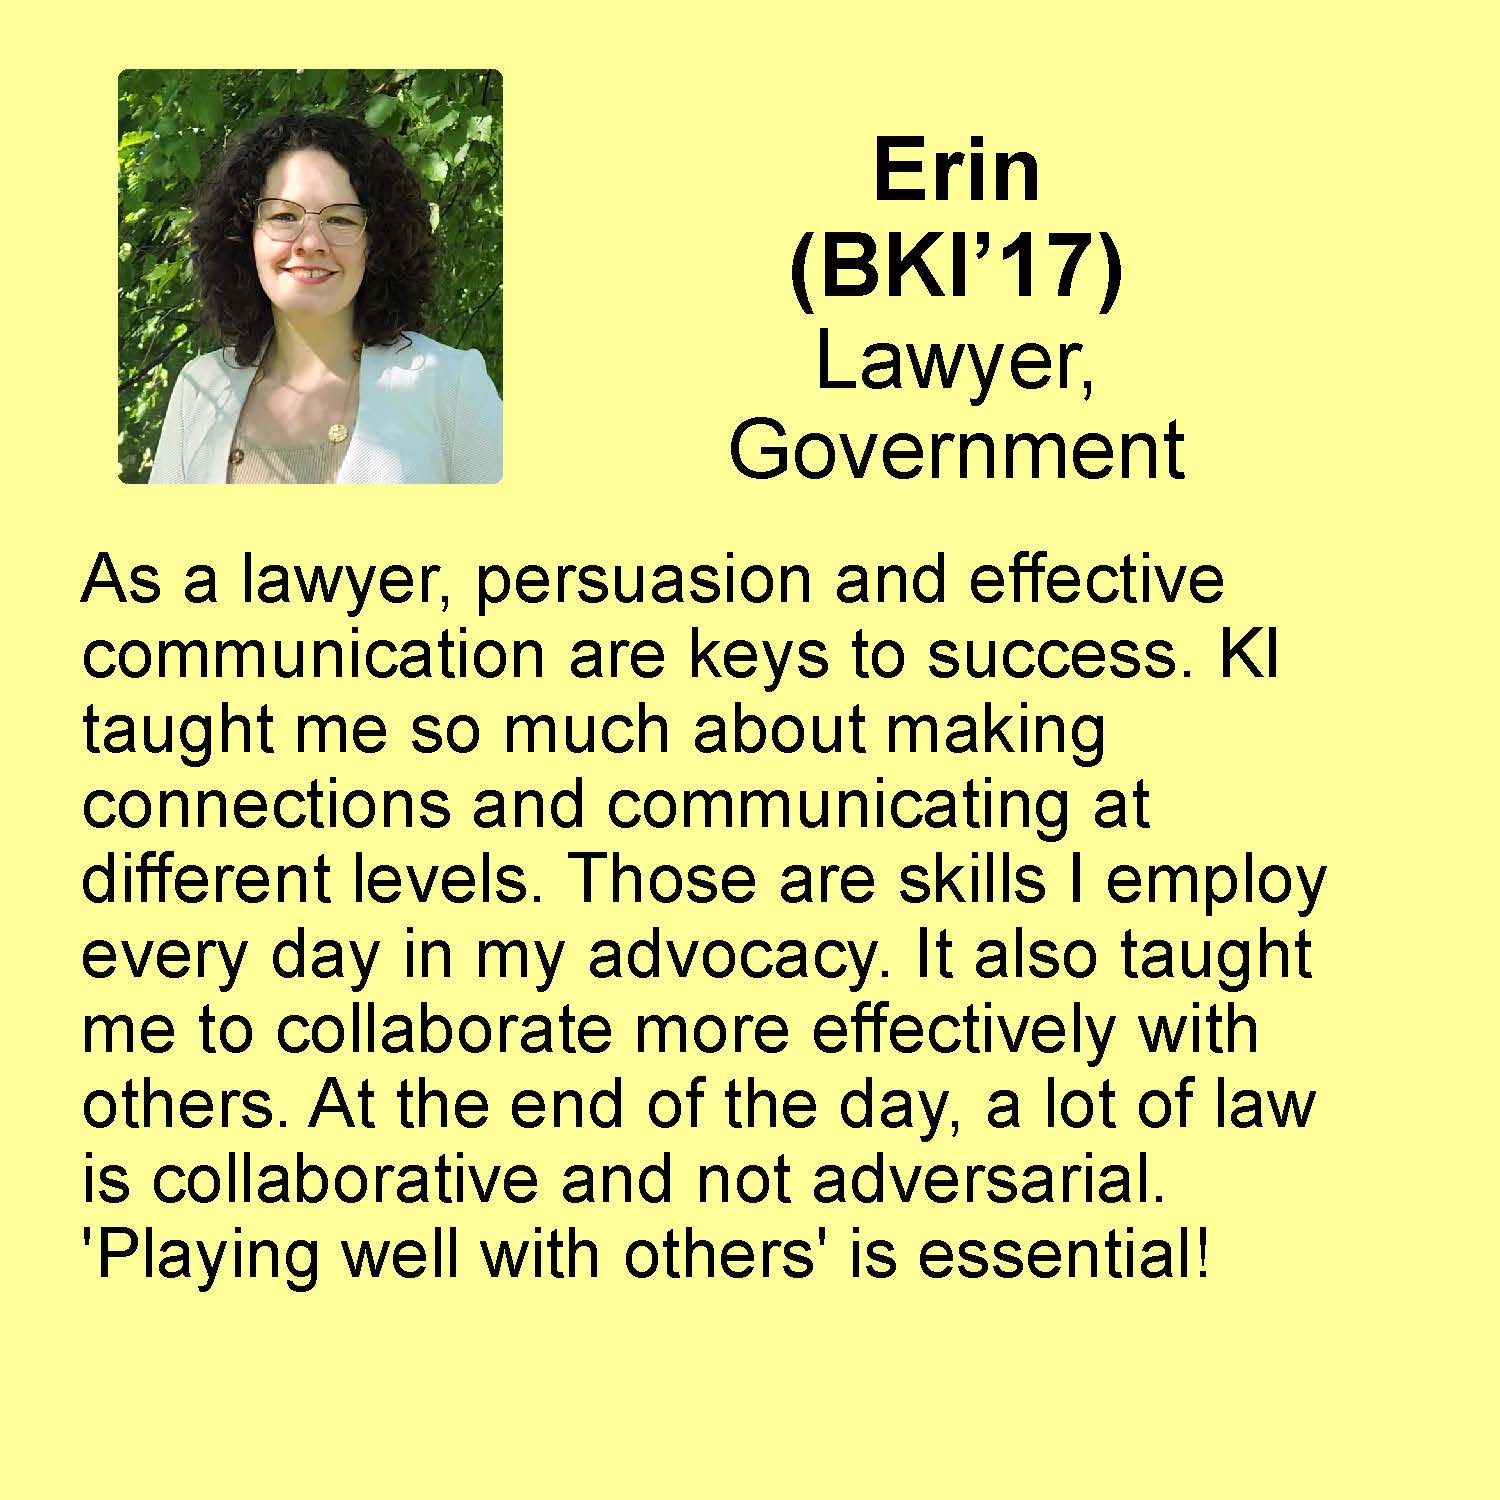 Erin profile Lawyer, Government